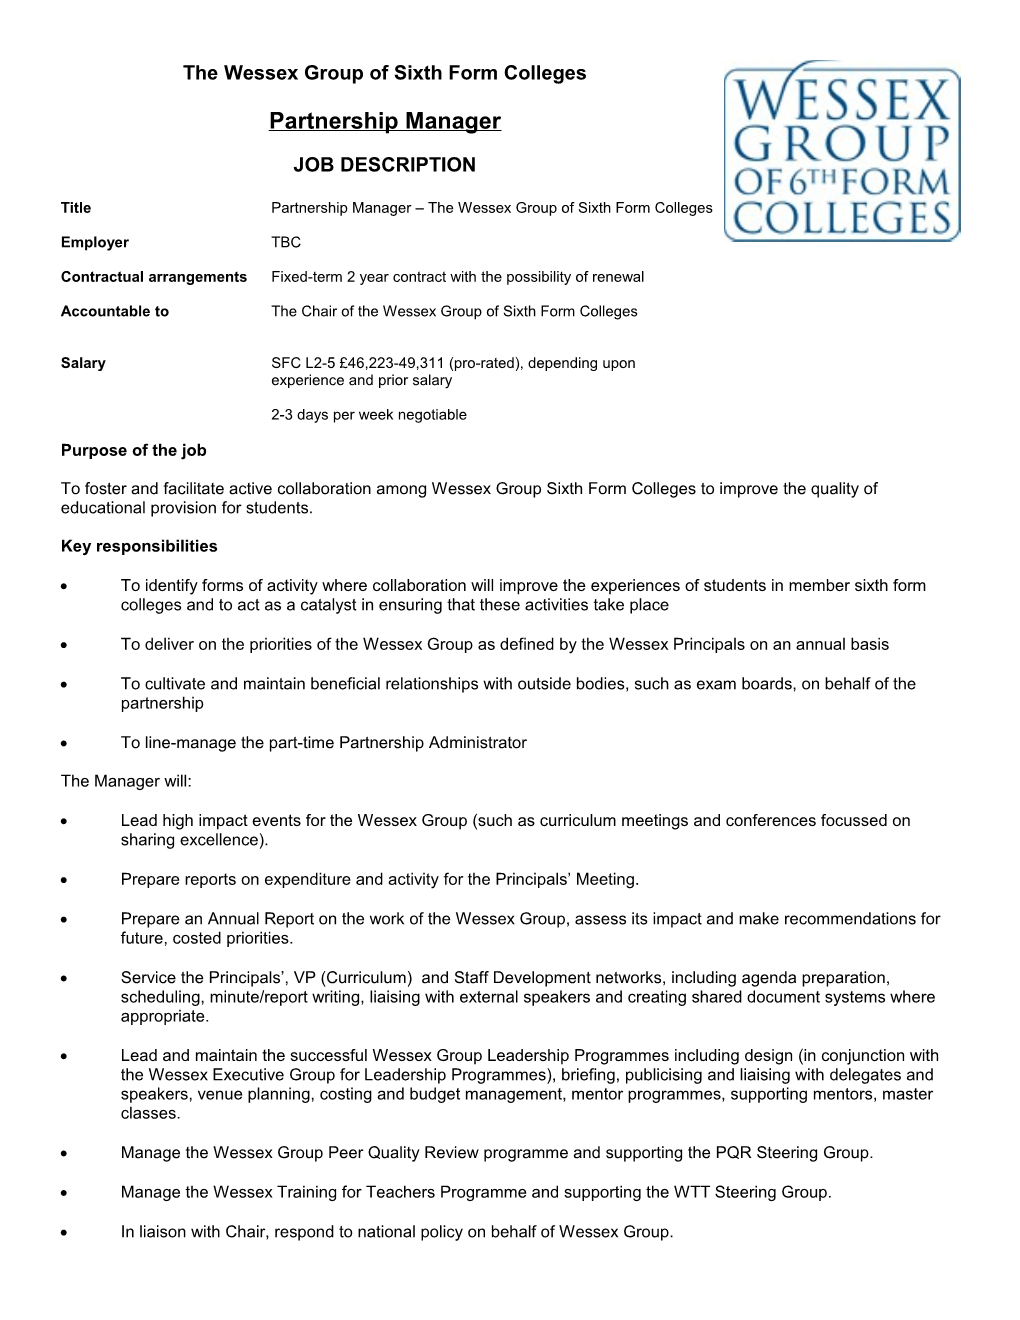 The Hampshire Sixth Form Colleges Partnership